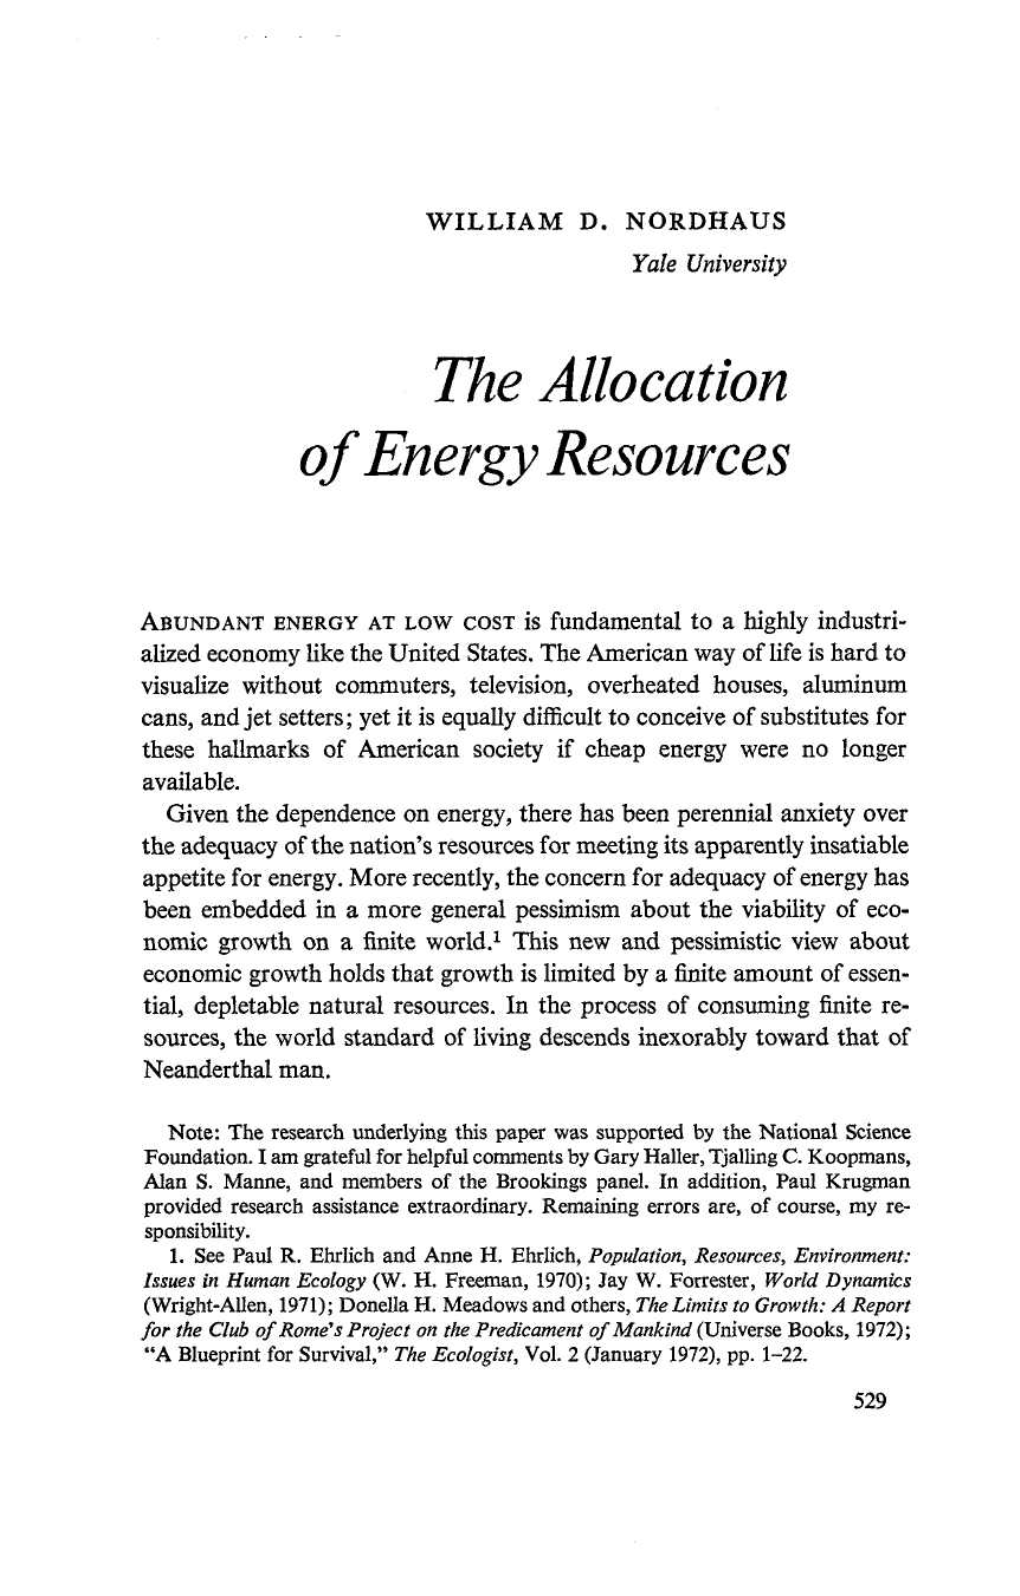 The Allocation of Energy Resources